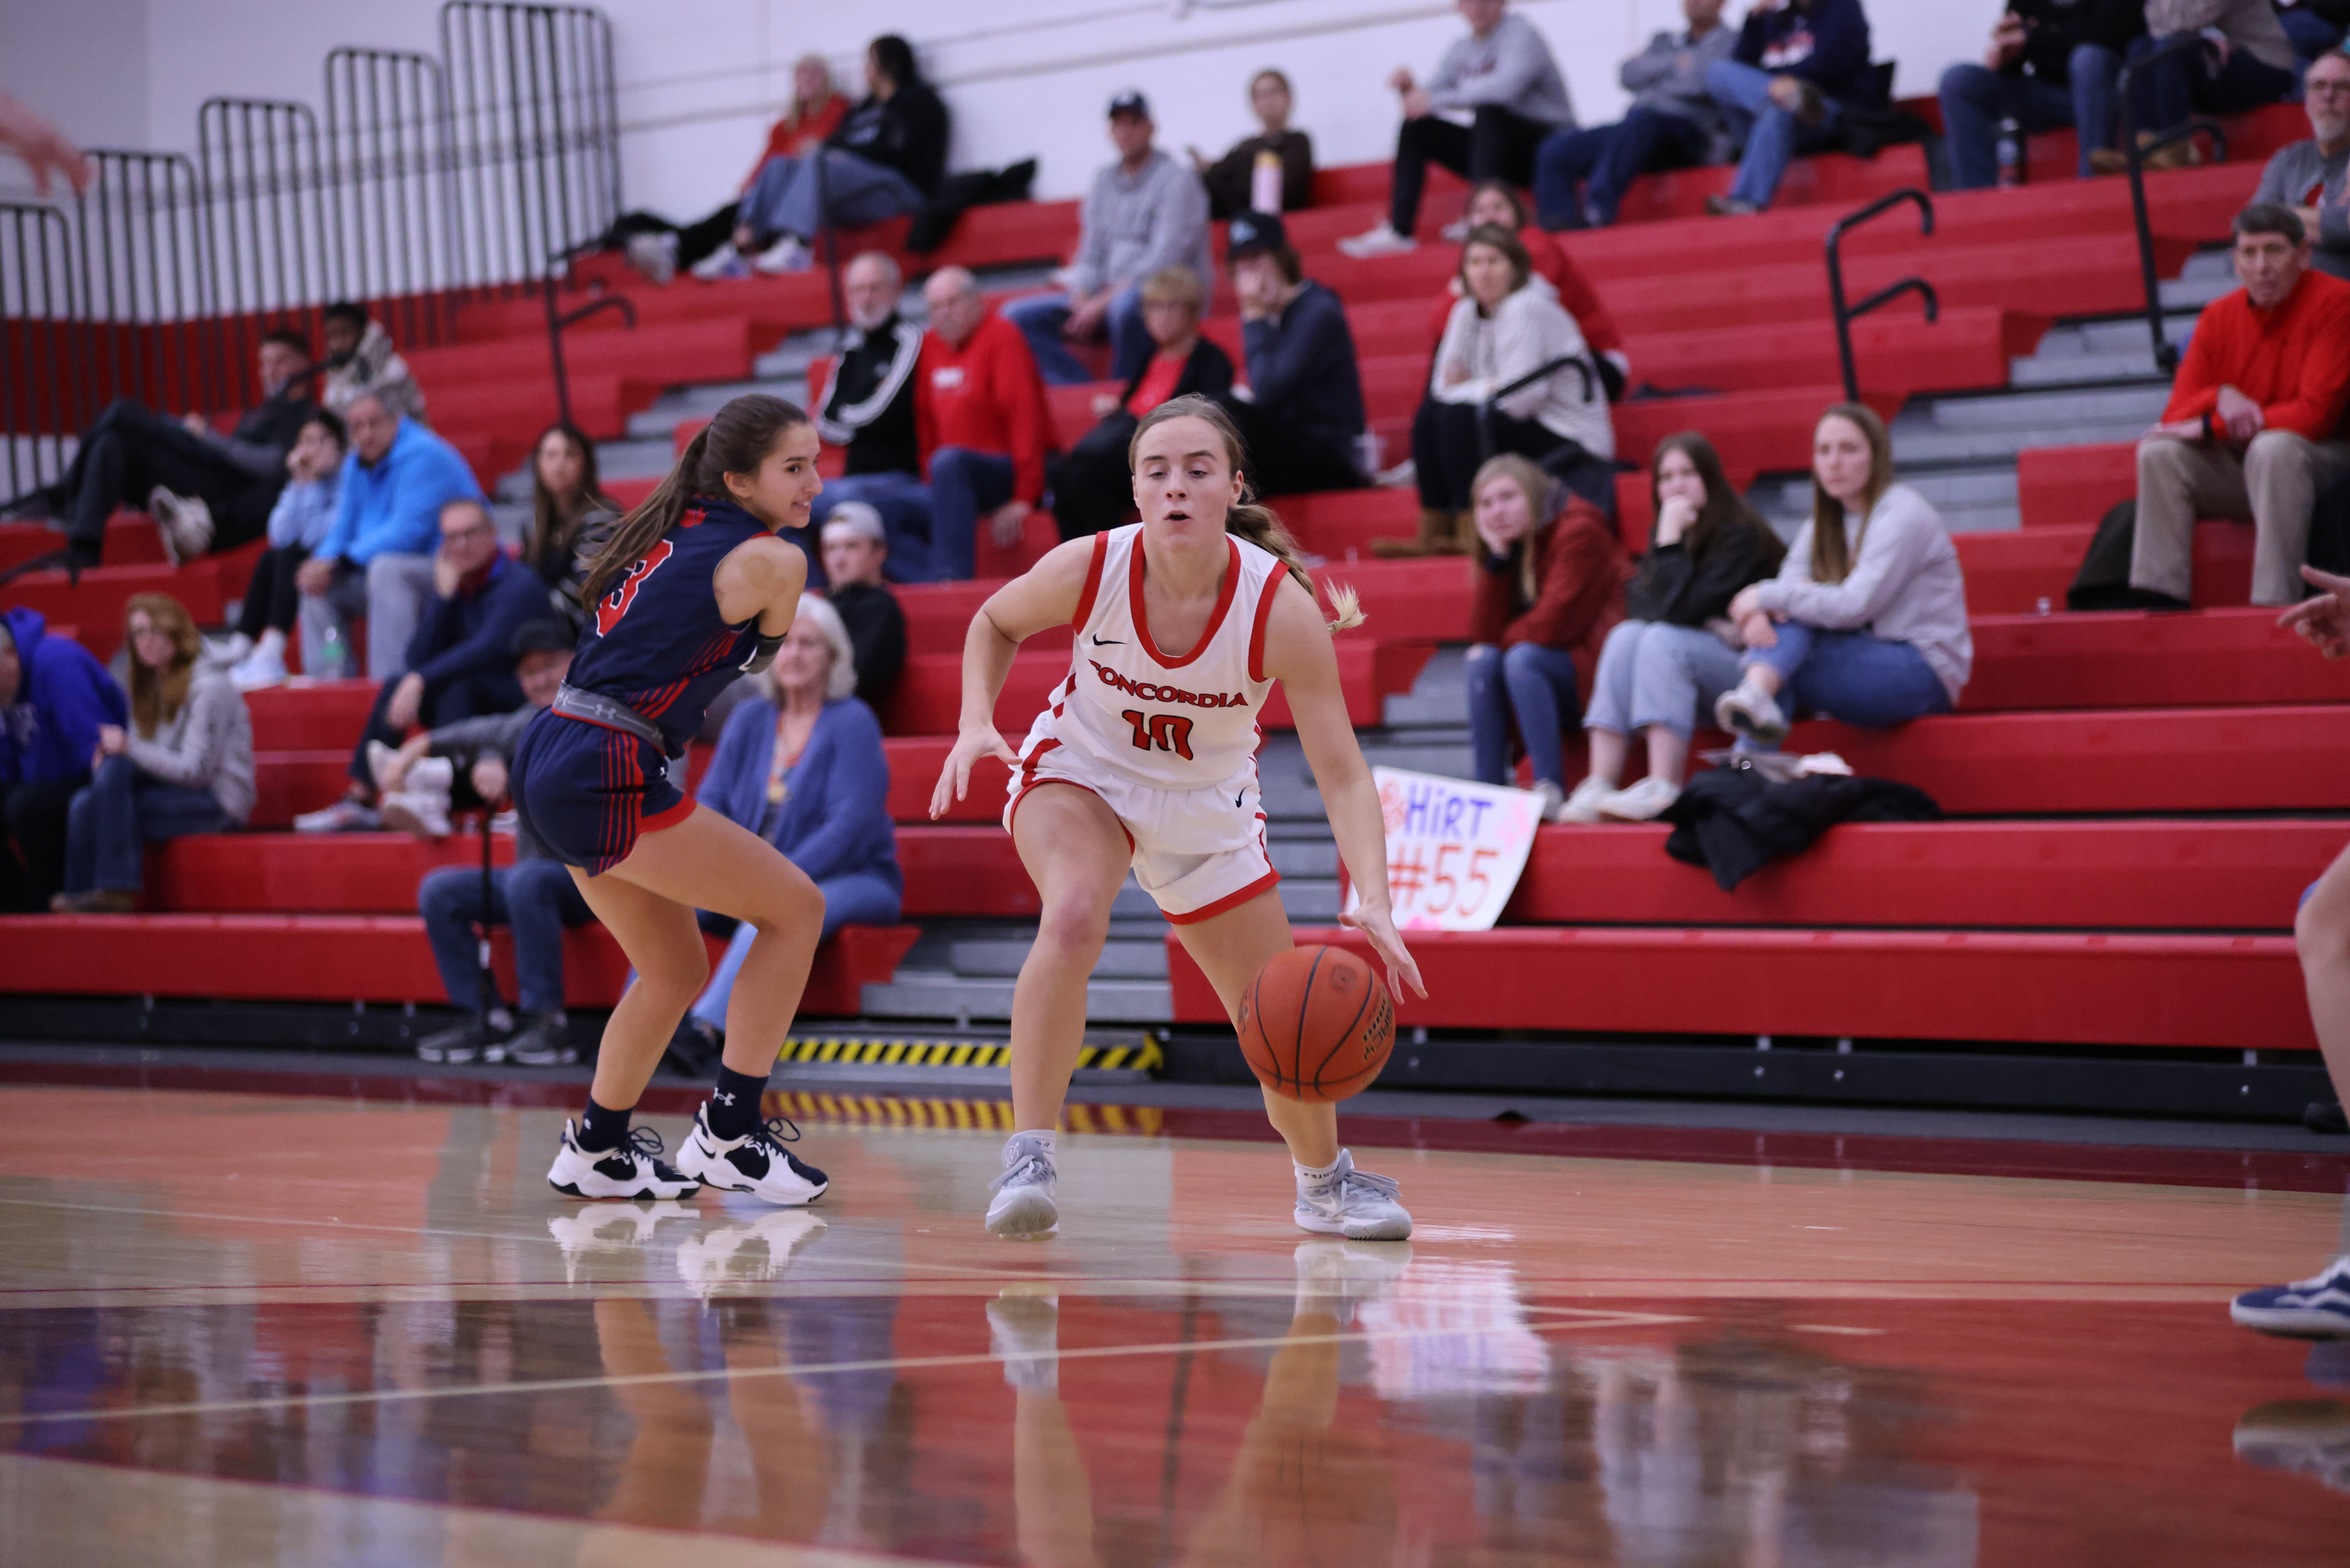 Women's Basketball overpowers Cleary, 78-39